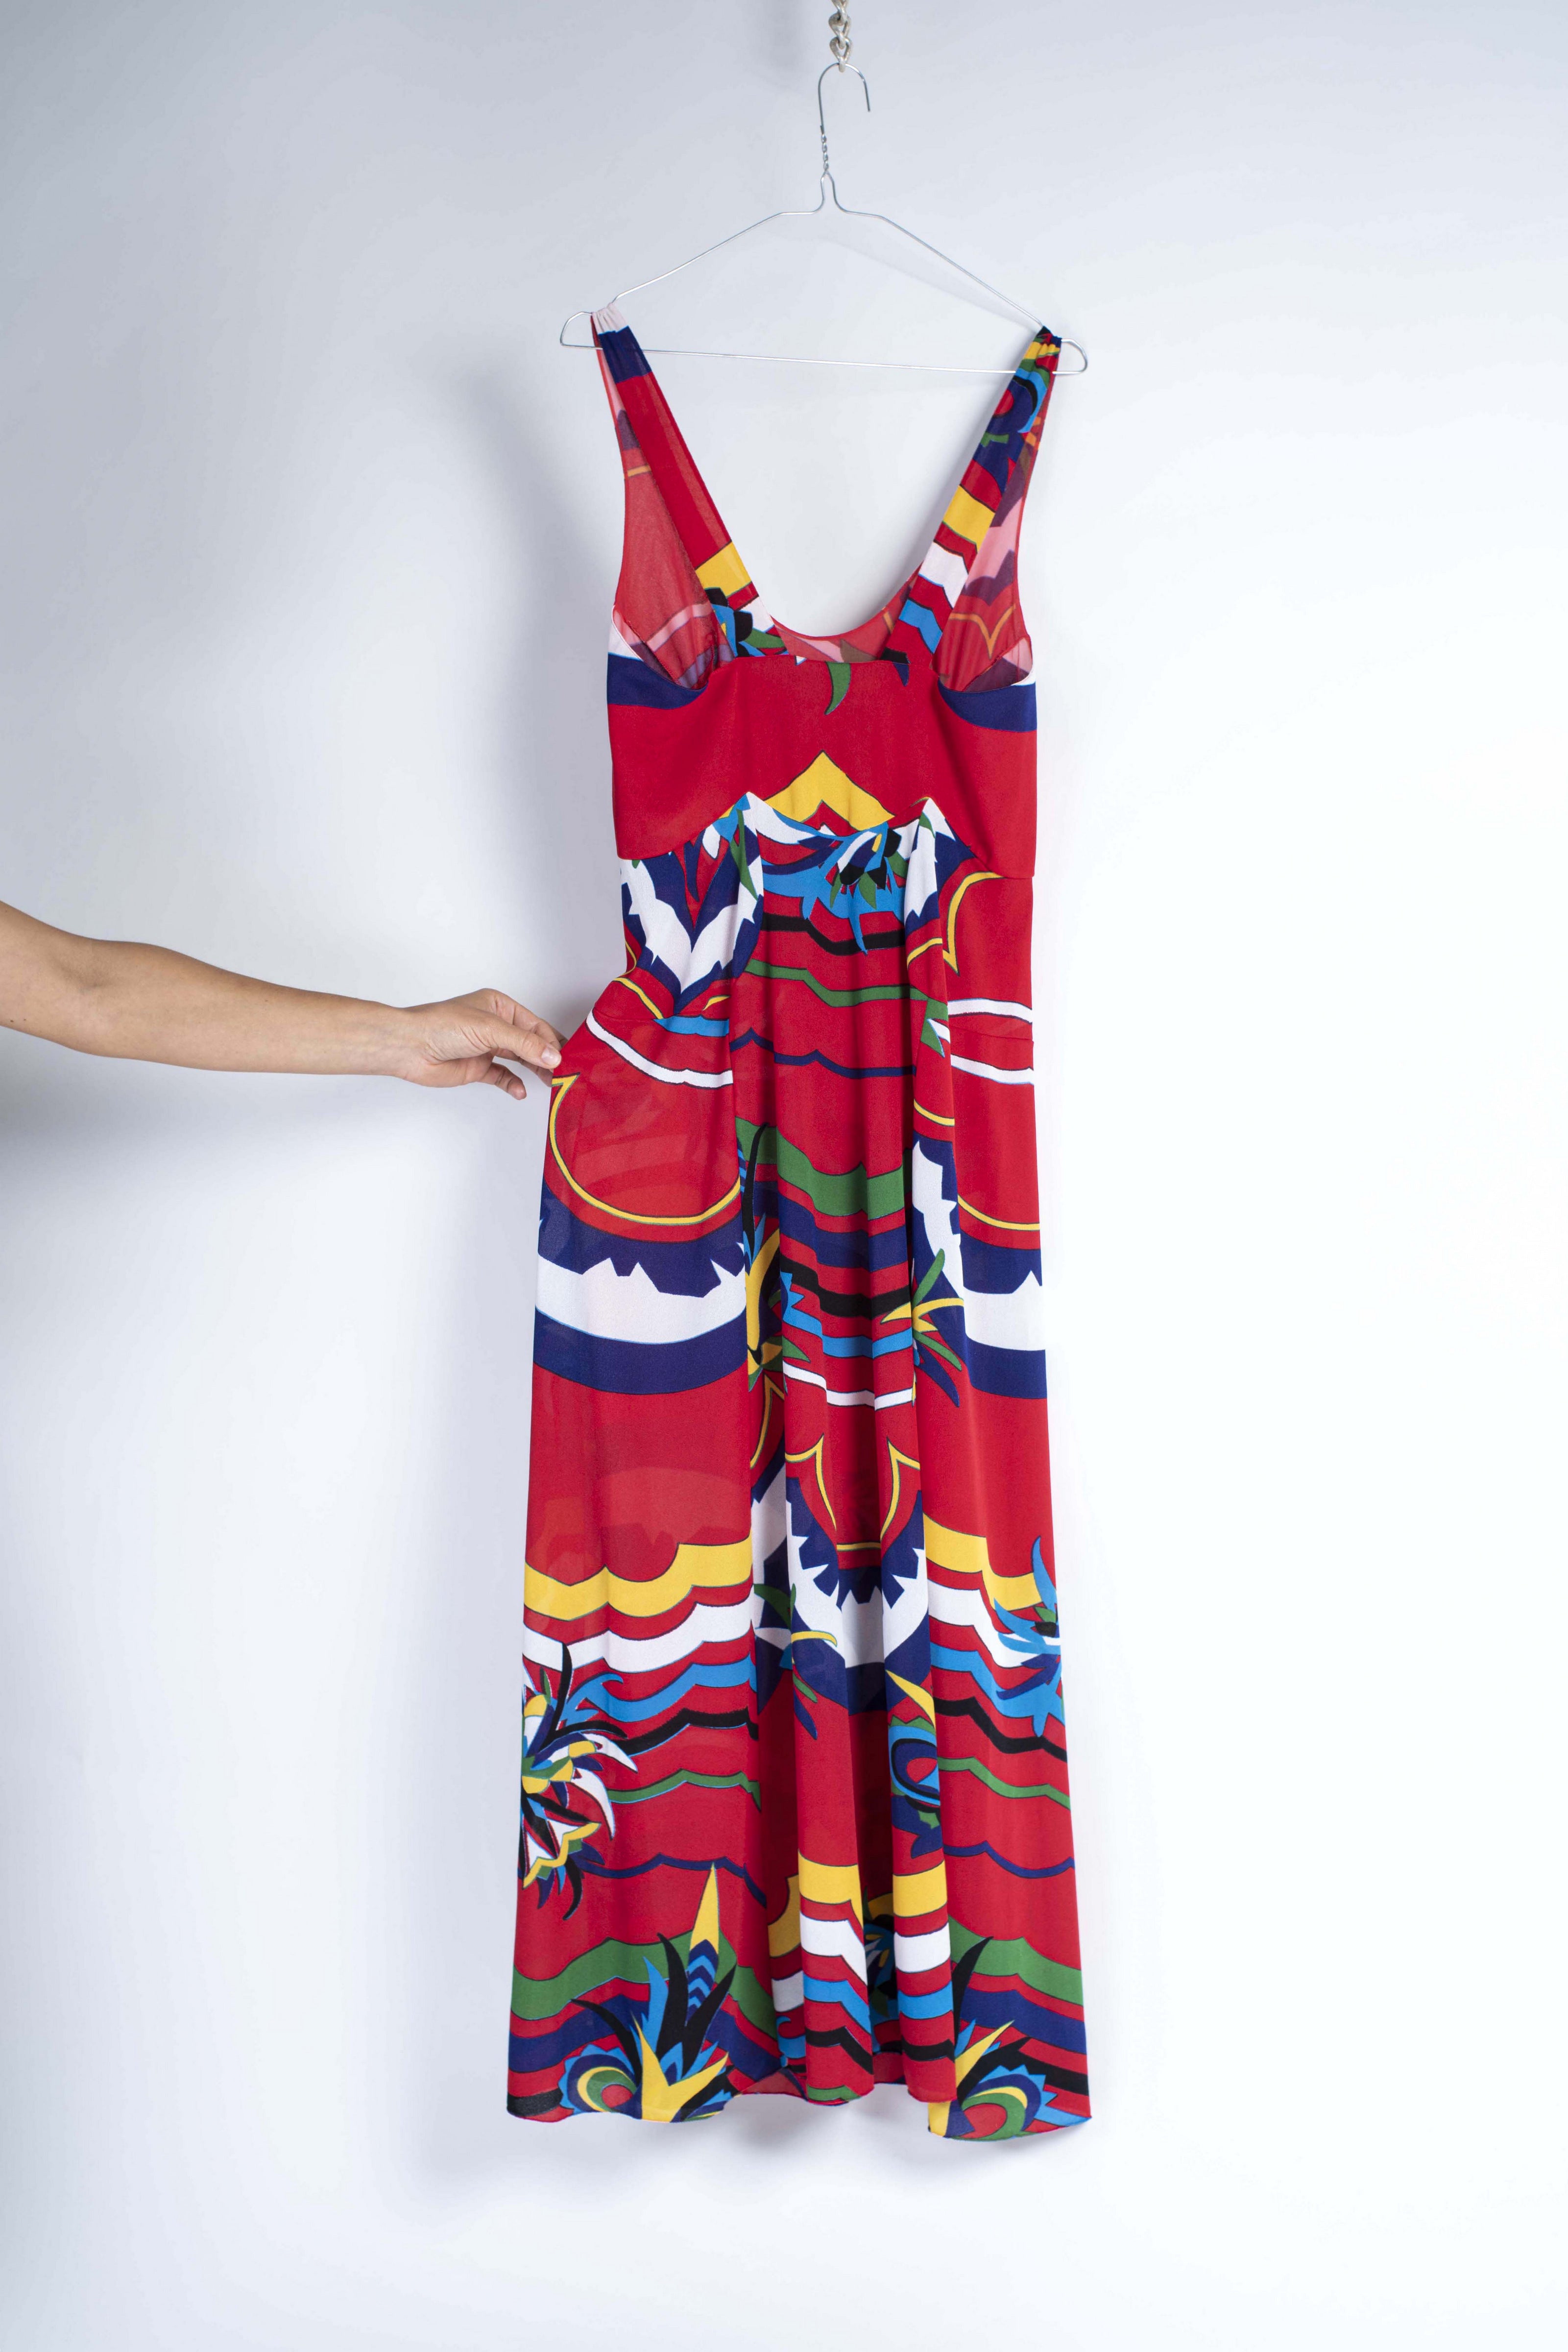 Stylish Summer Abstract Print Red Maxi Dress, Size S